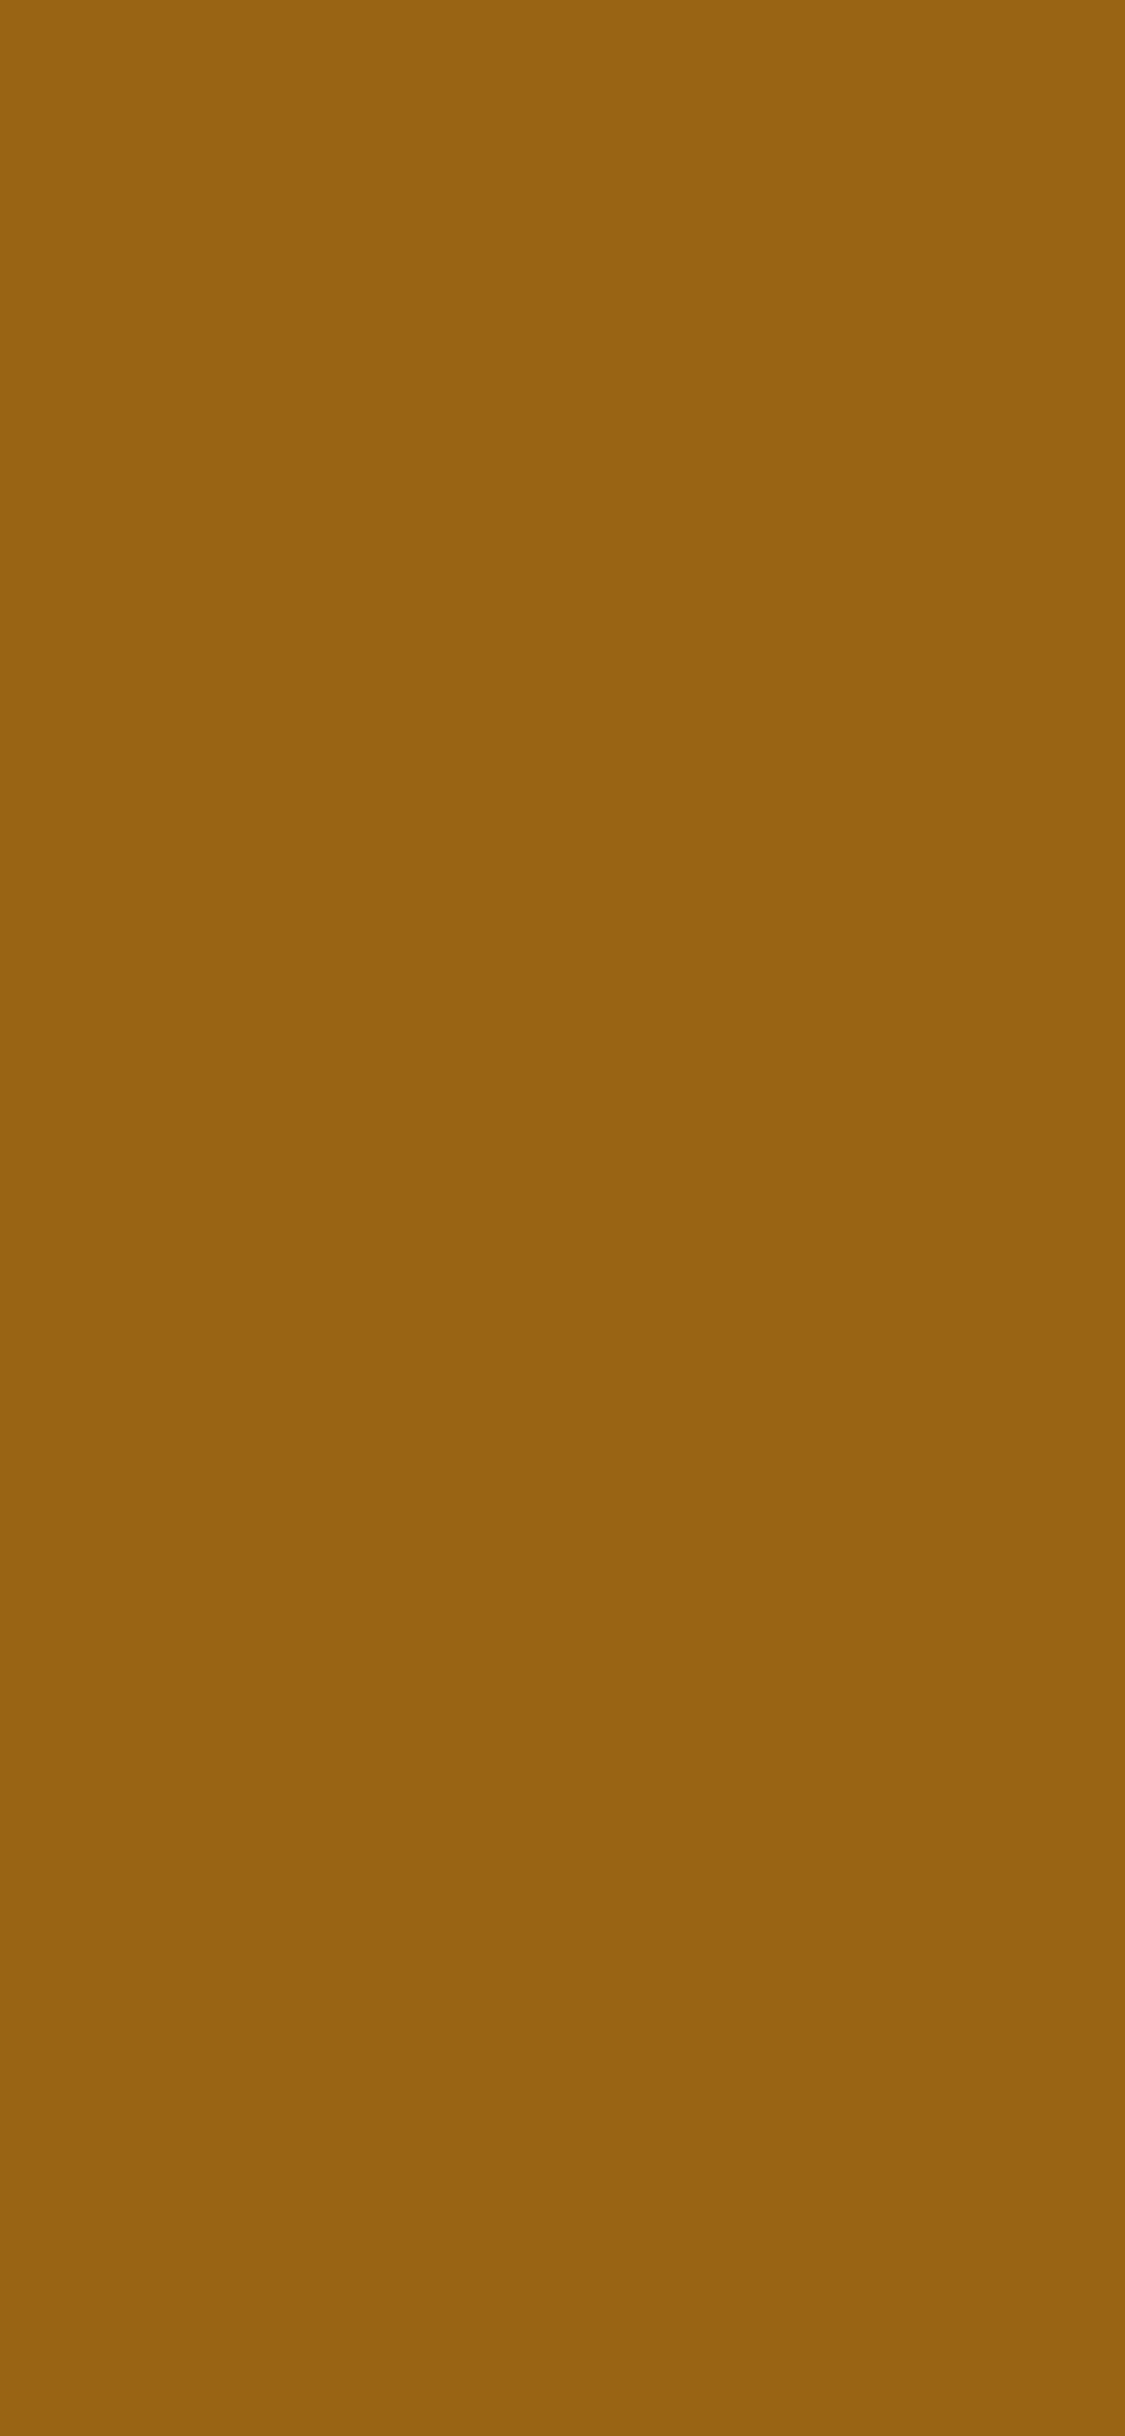 1125x2436 Golden Brown Solid Color Background